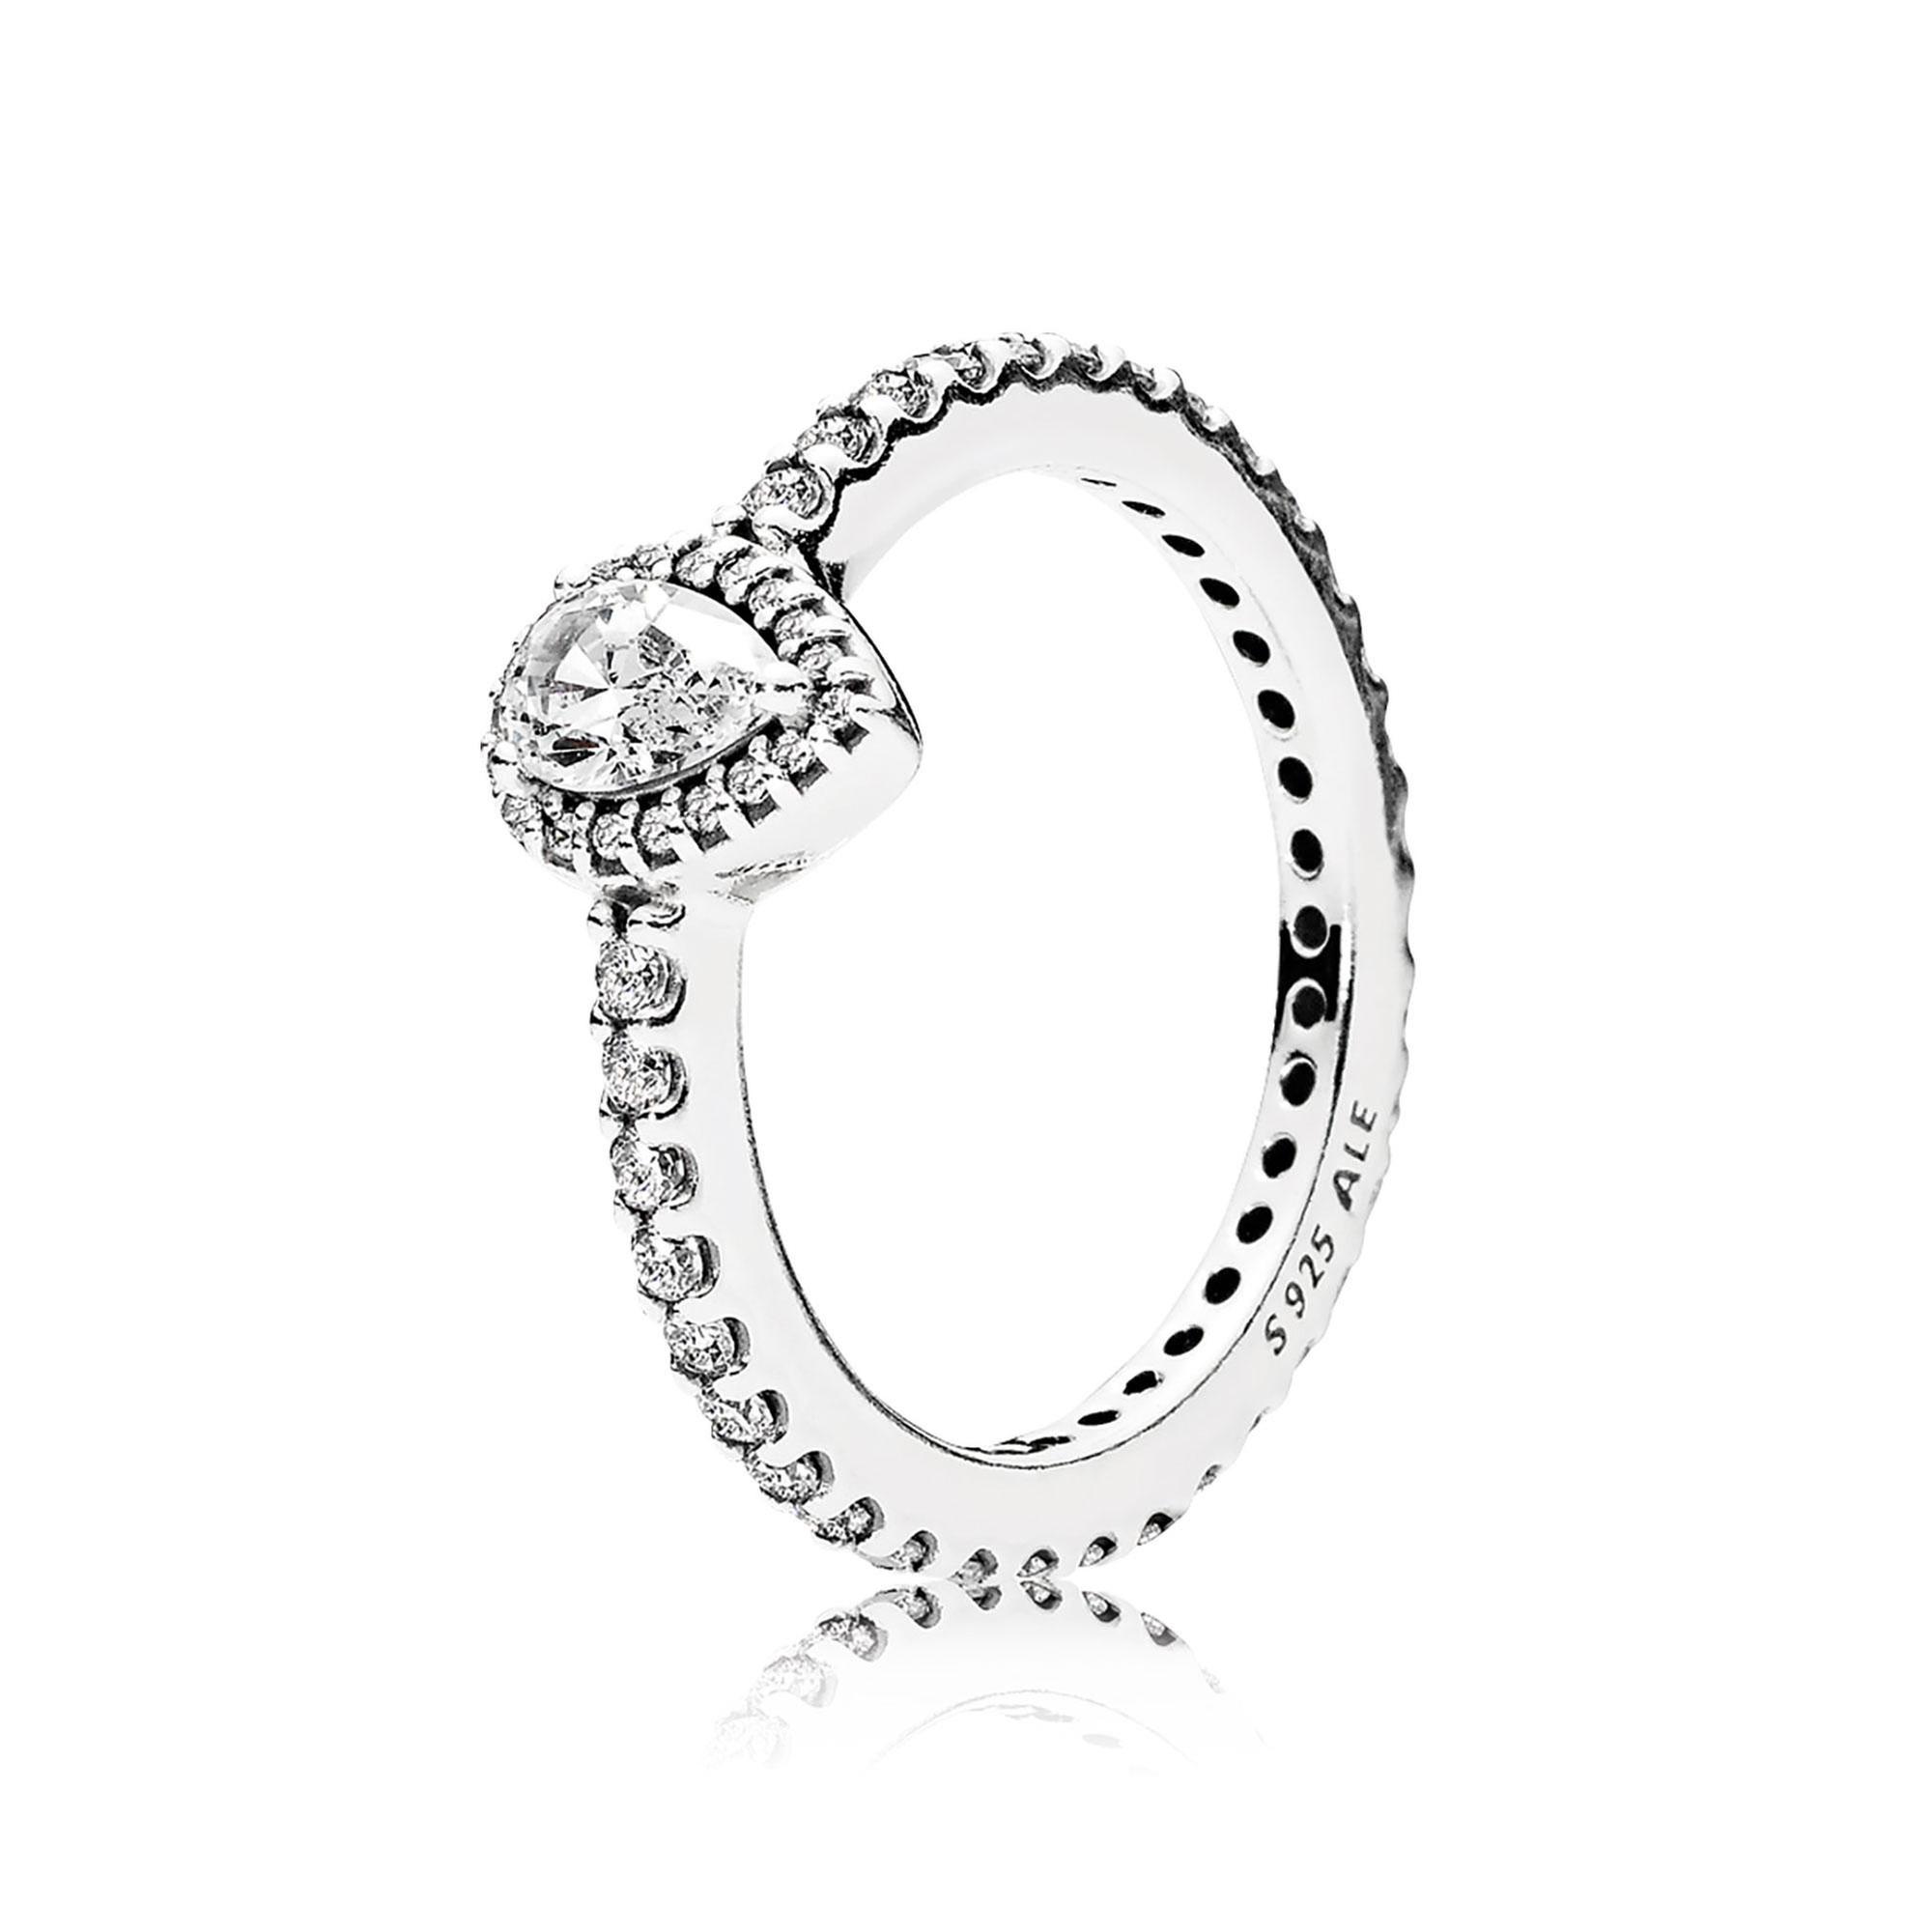 Pandora Clear Sparkling Crown Ring | REEDS Jewelers